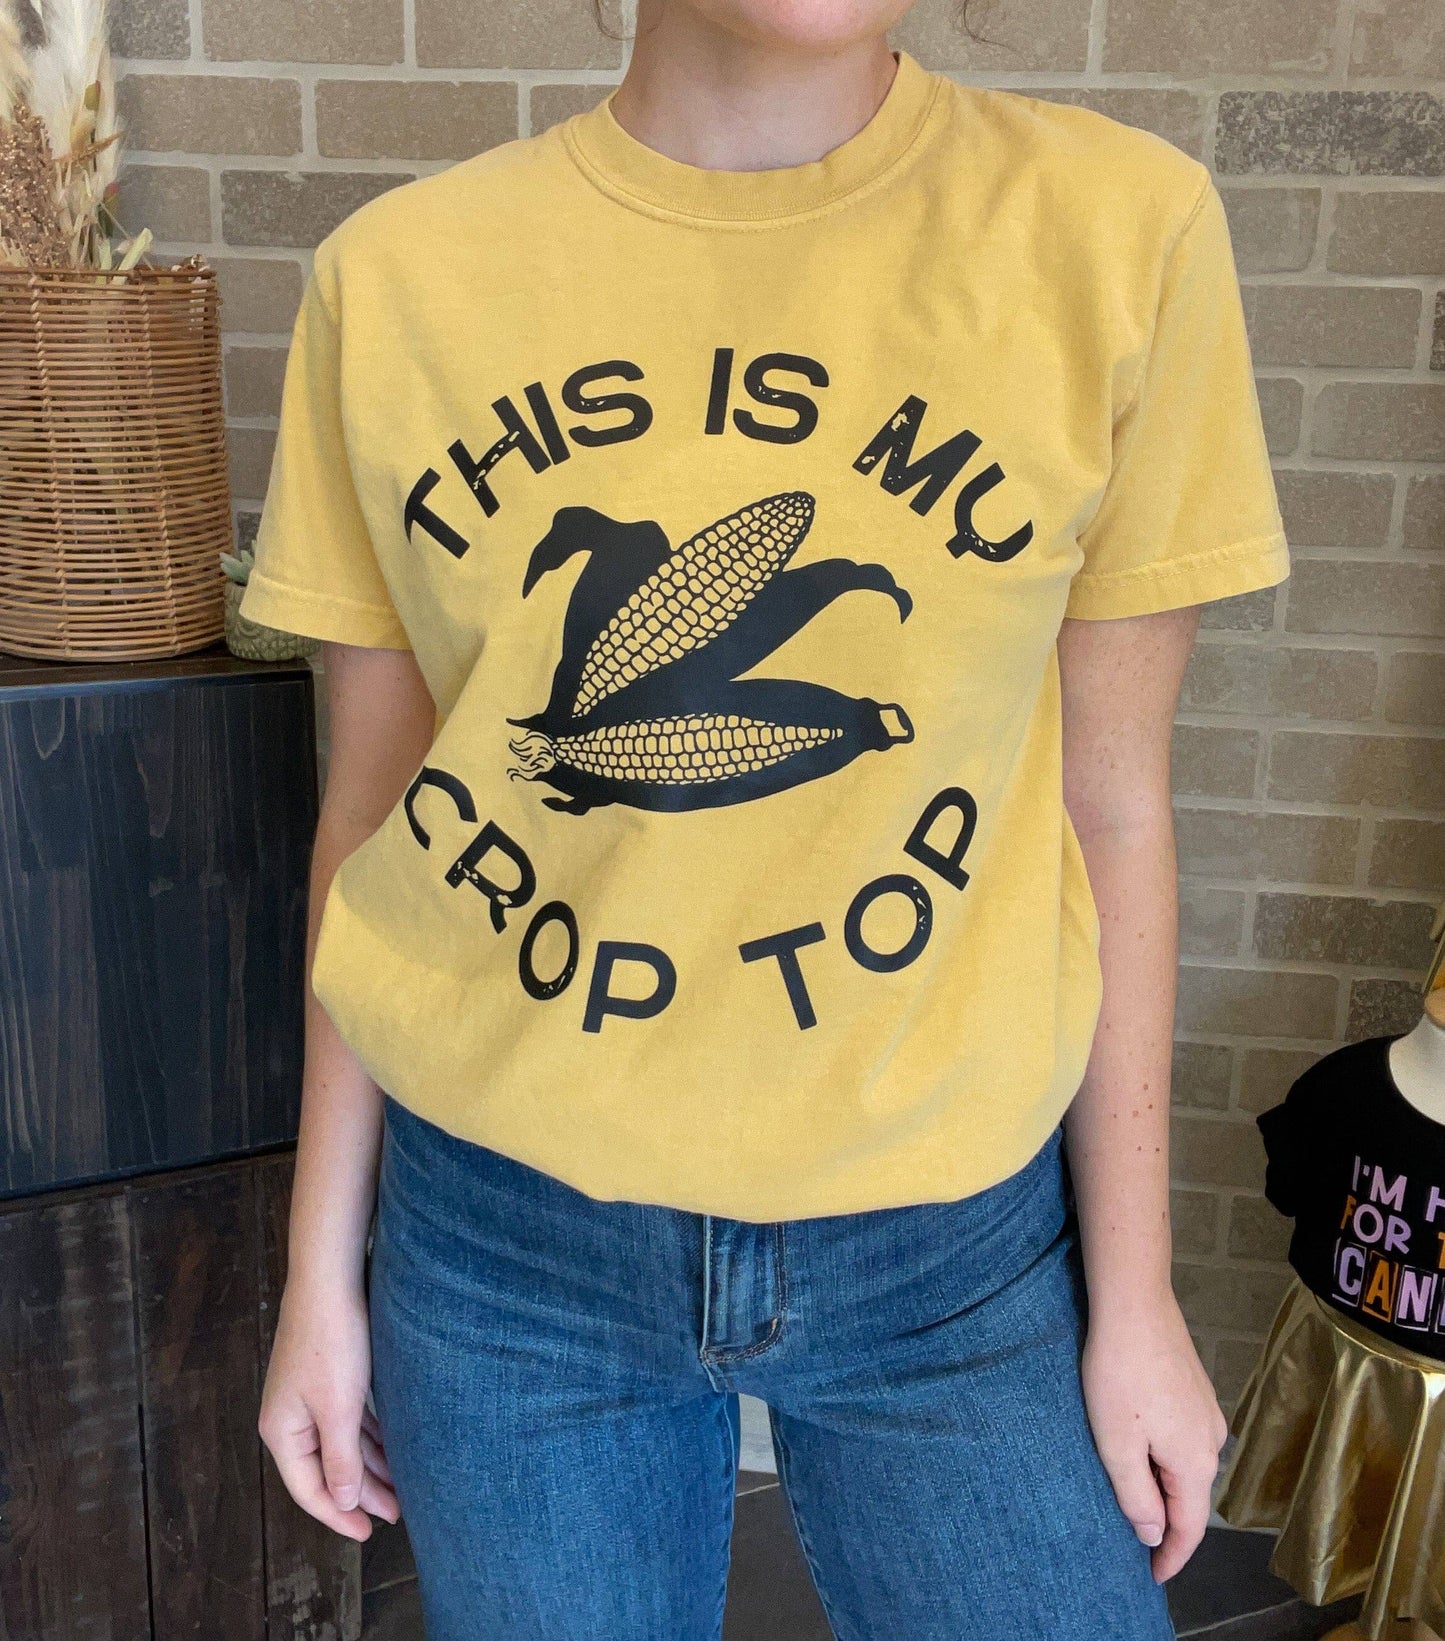 This is My Crop Top